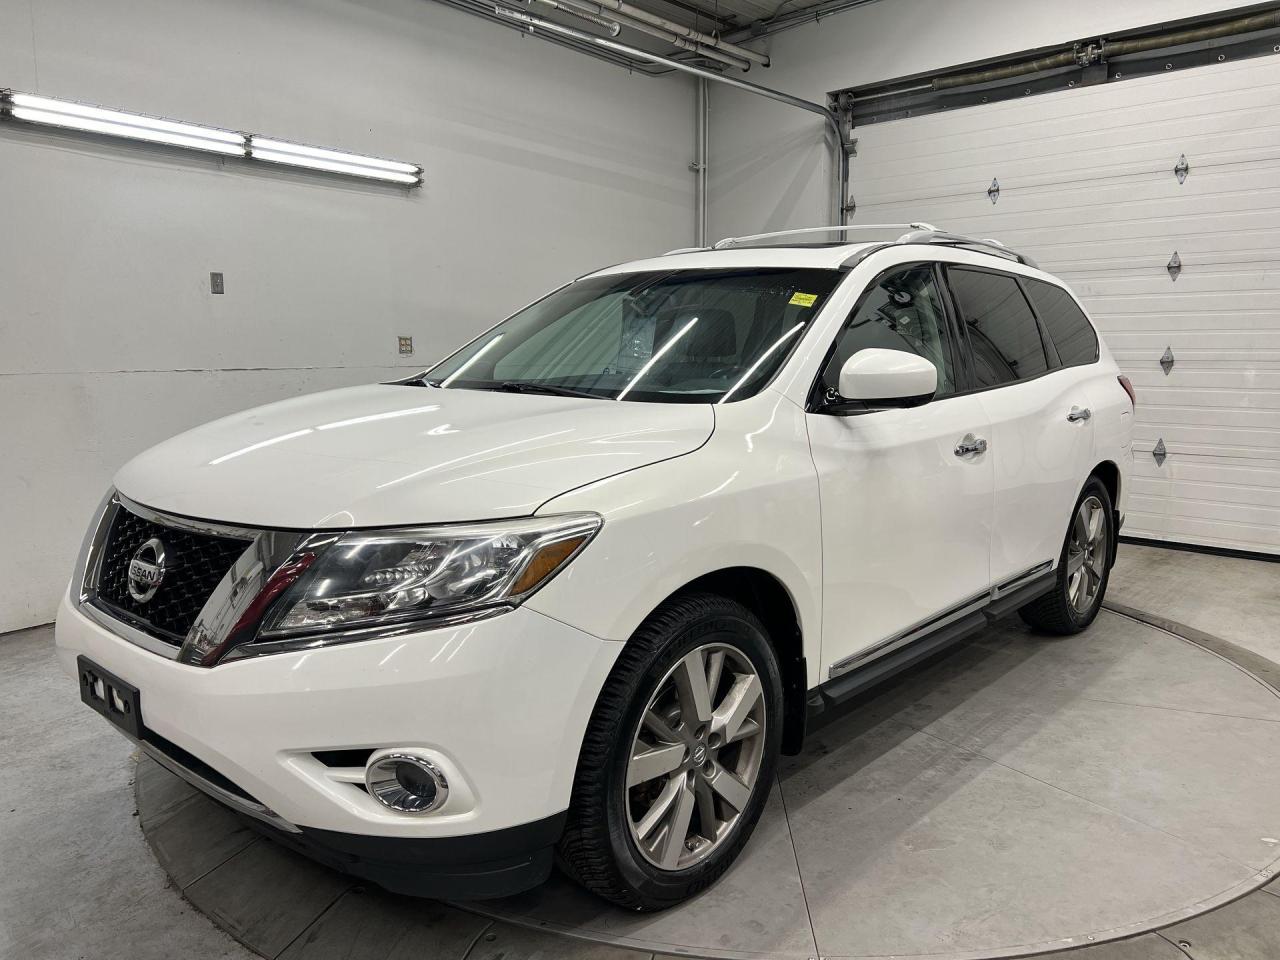 Used 2014 Nissan Pathfinder PLATINUM AWD PANO ROOF DUAL DVD 360 CAM NAV for Sale in Ottawa, Ontario